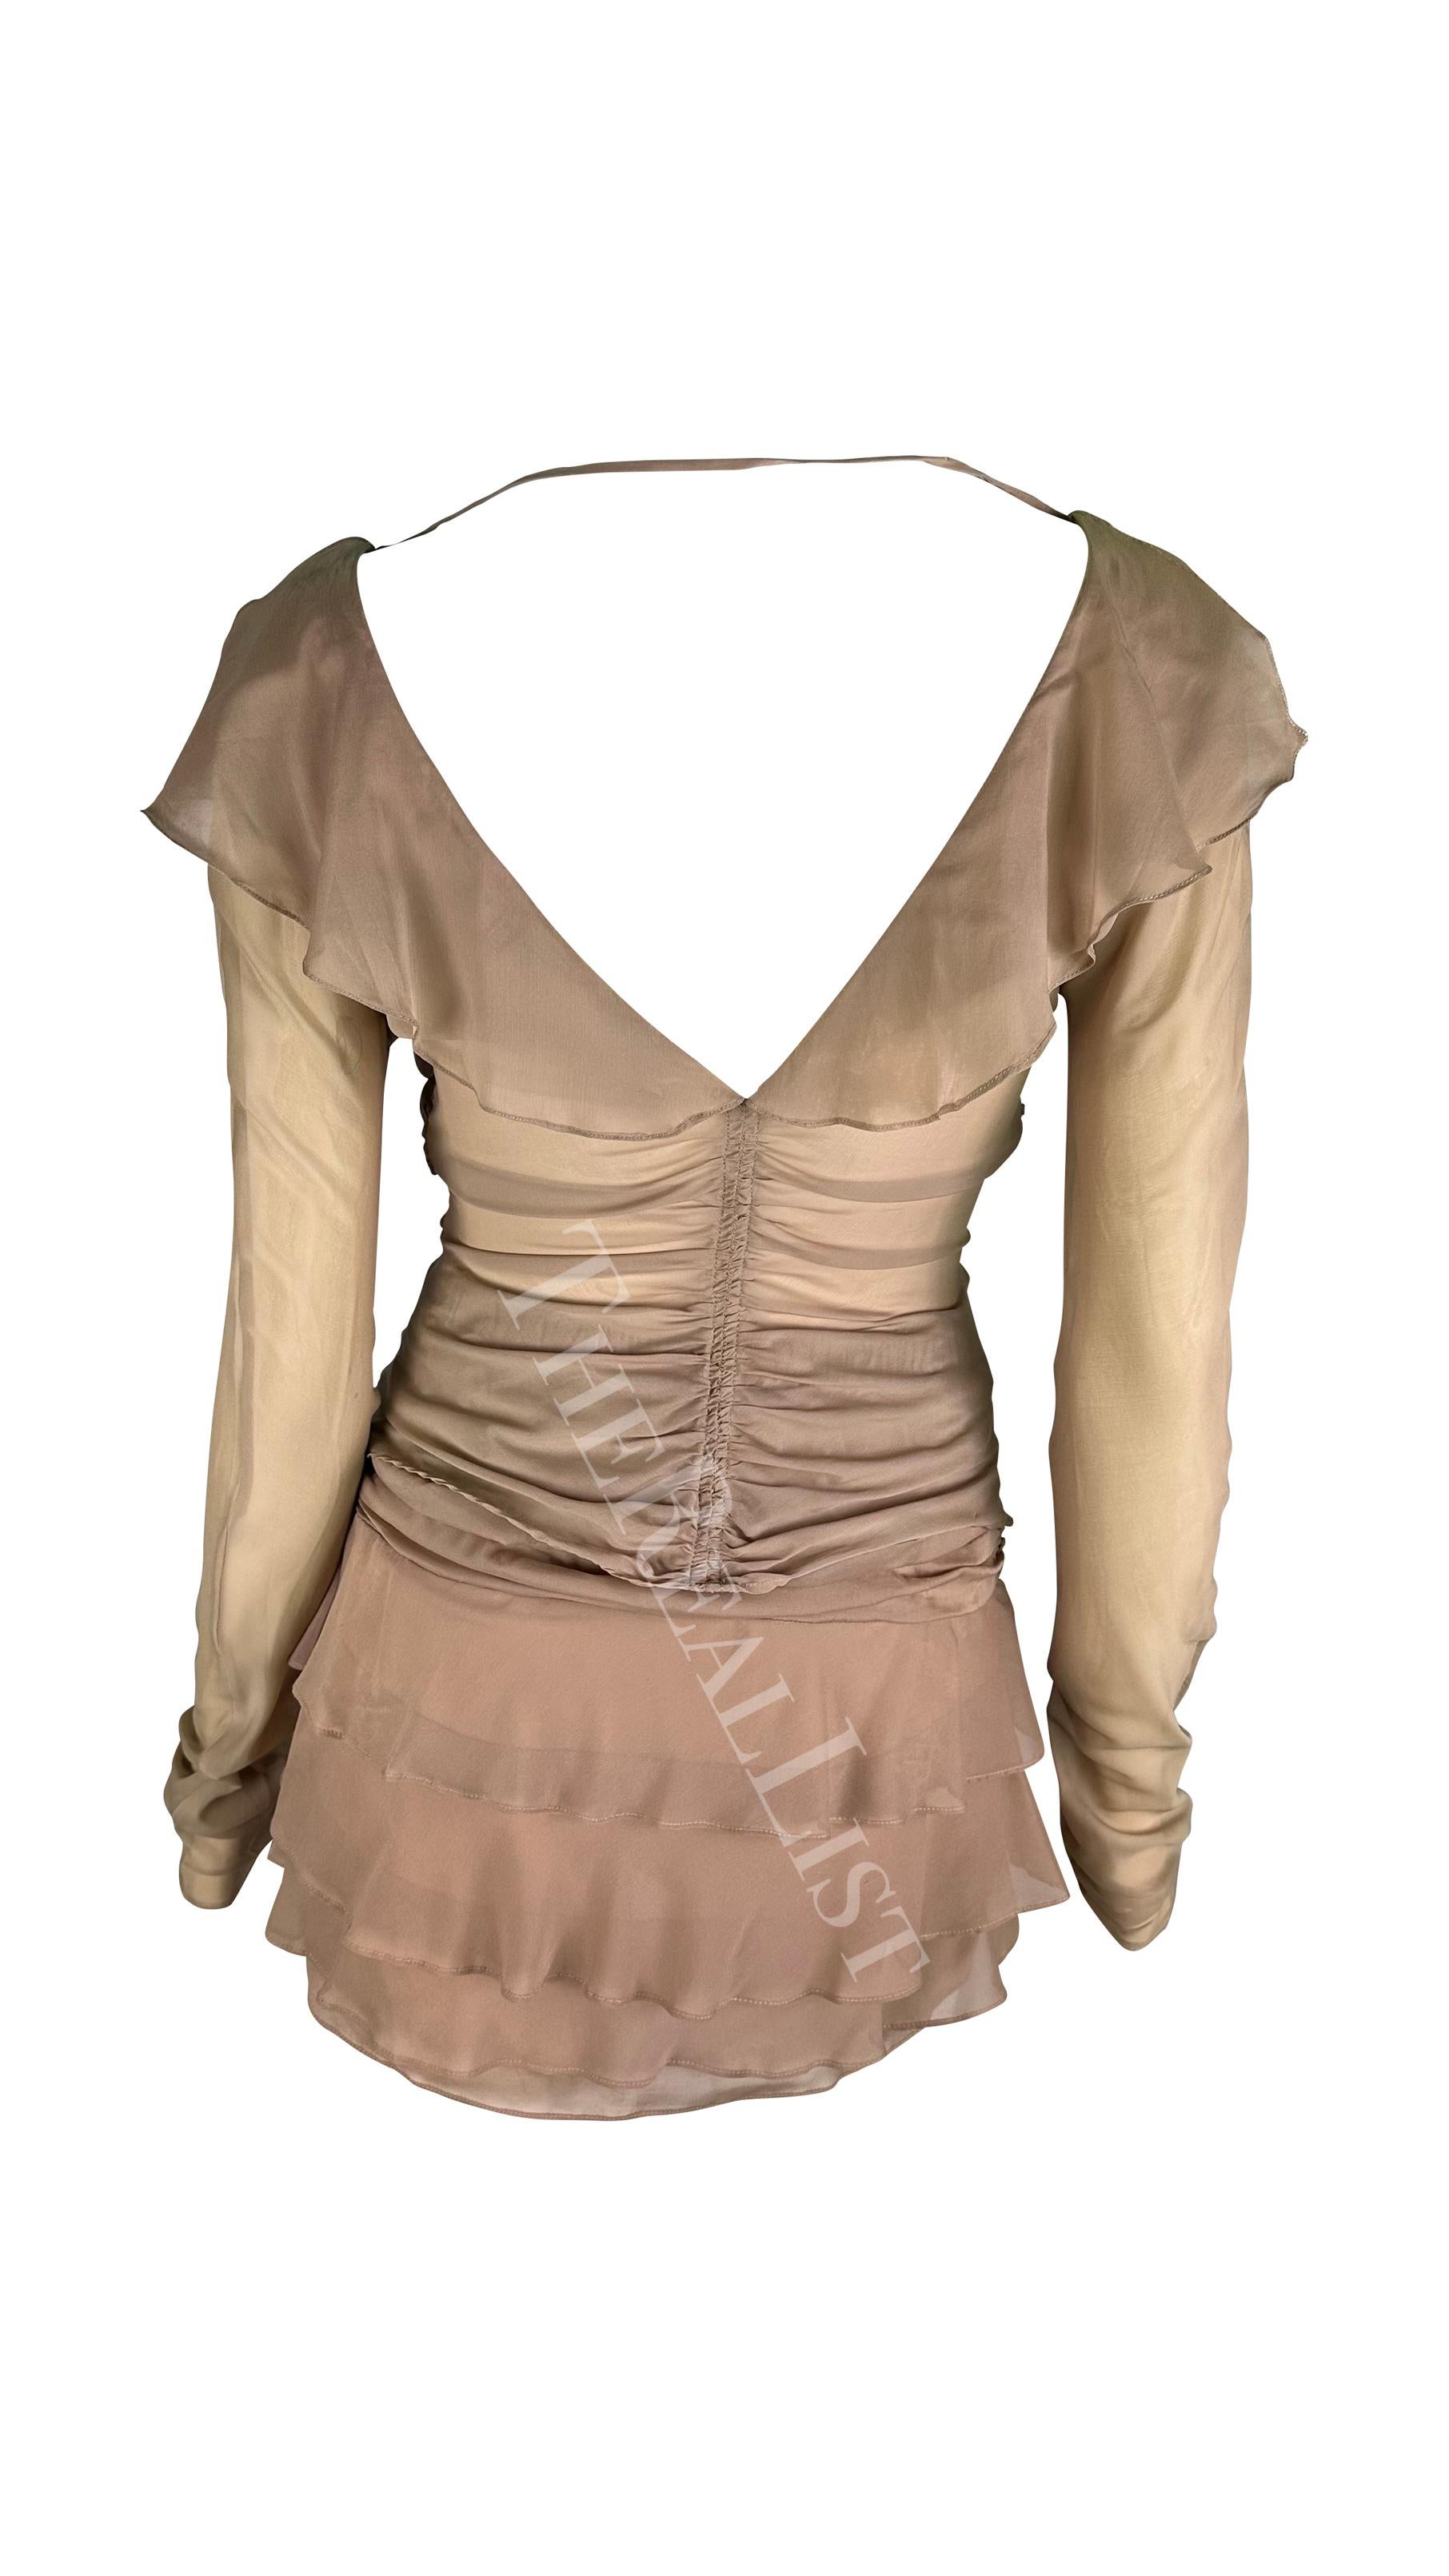 S/S 2003 Gucci by Tom Ford Dusty Pink Beige Sheer Chiffon Ruffle Skirt Set For Sale 1